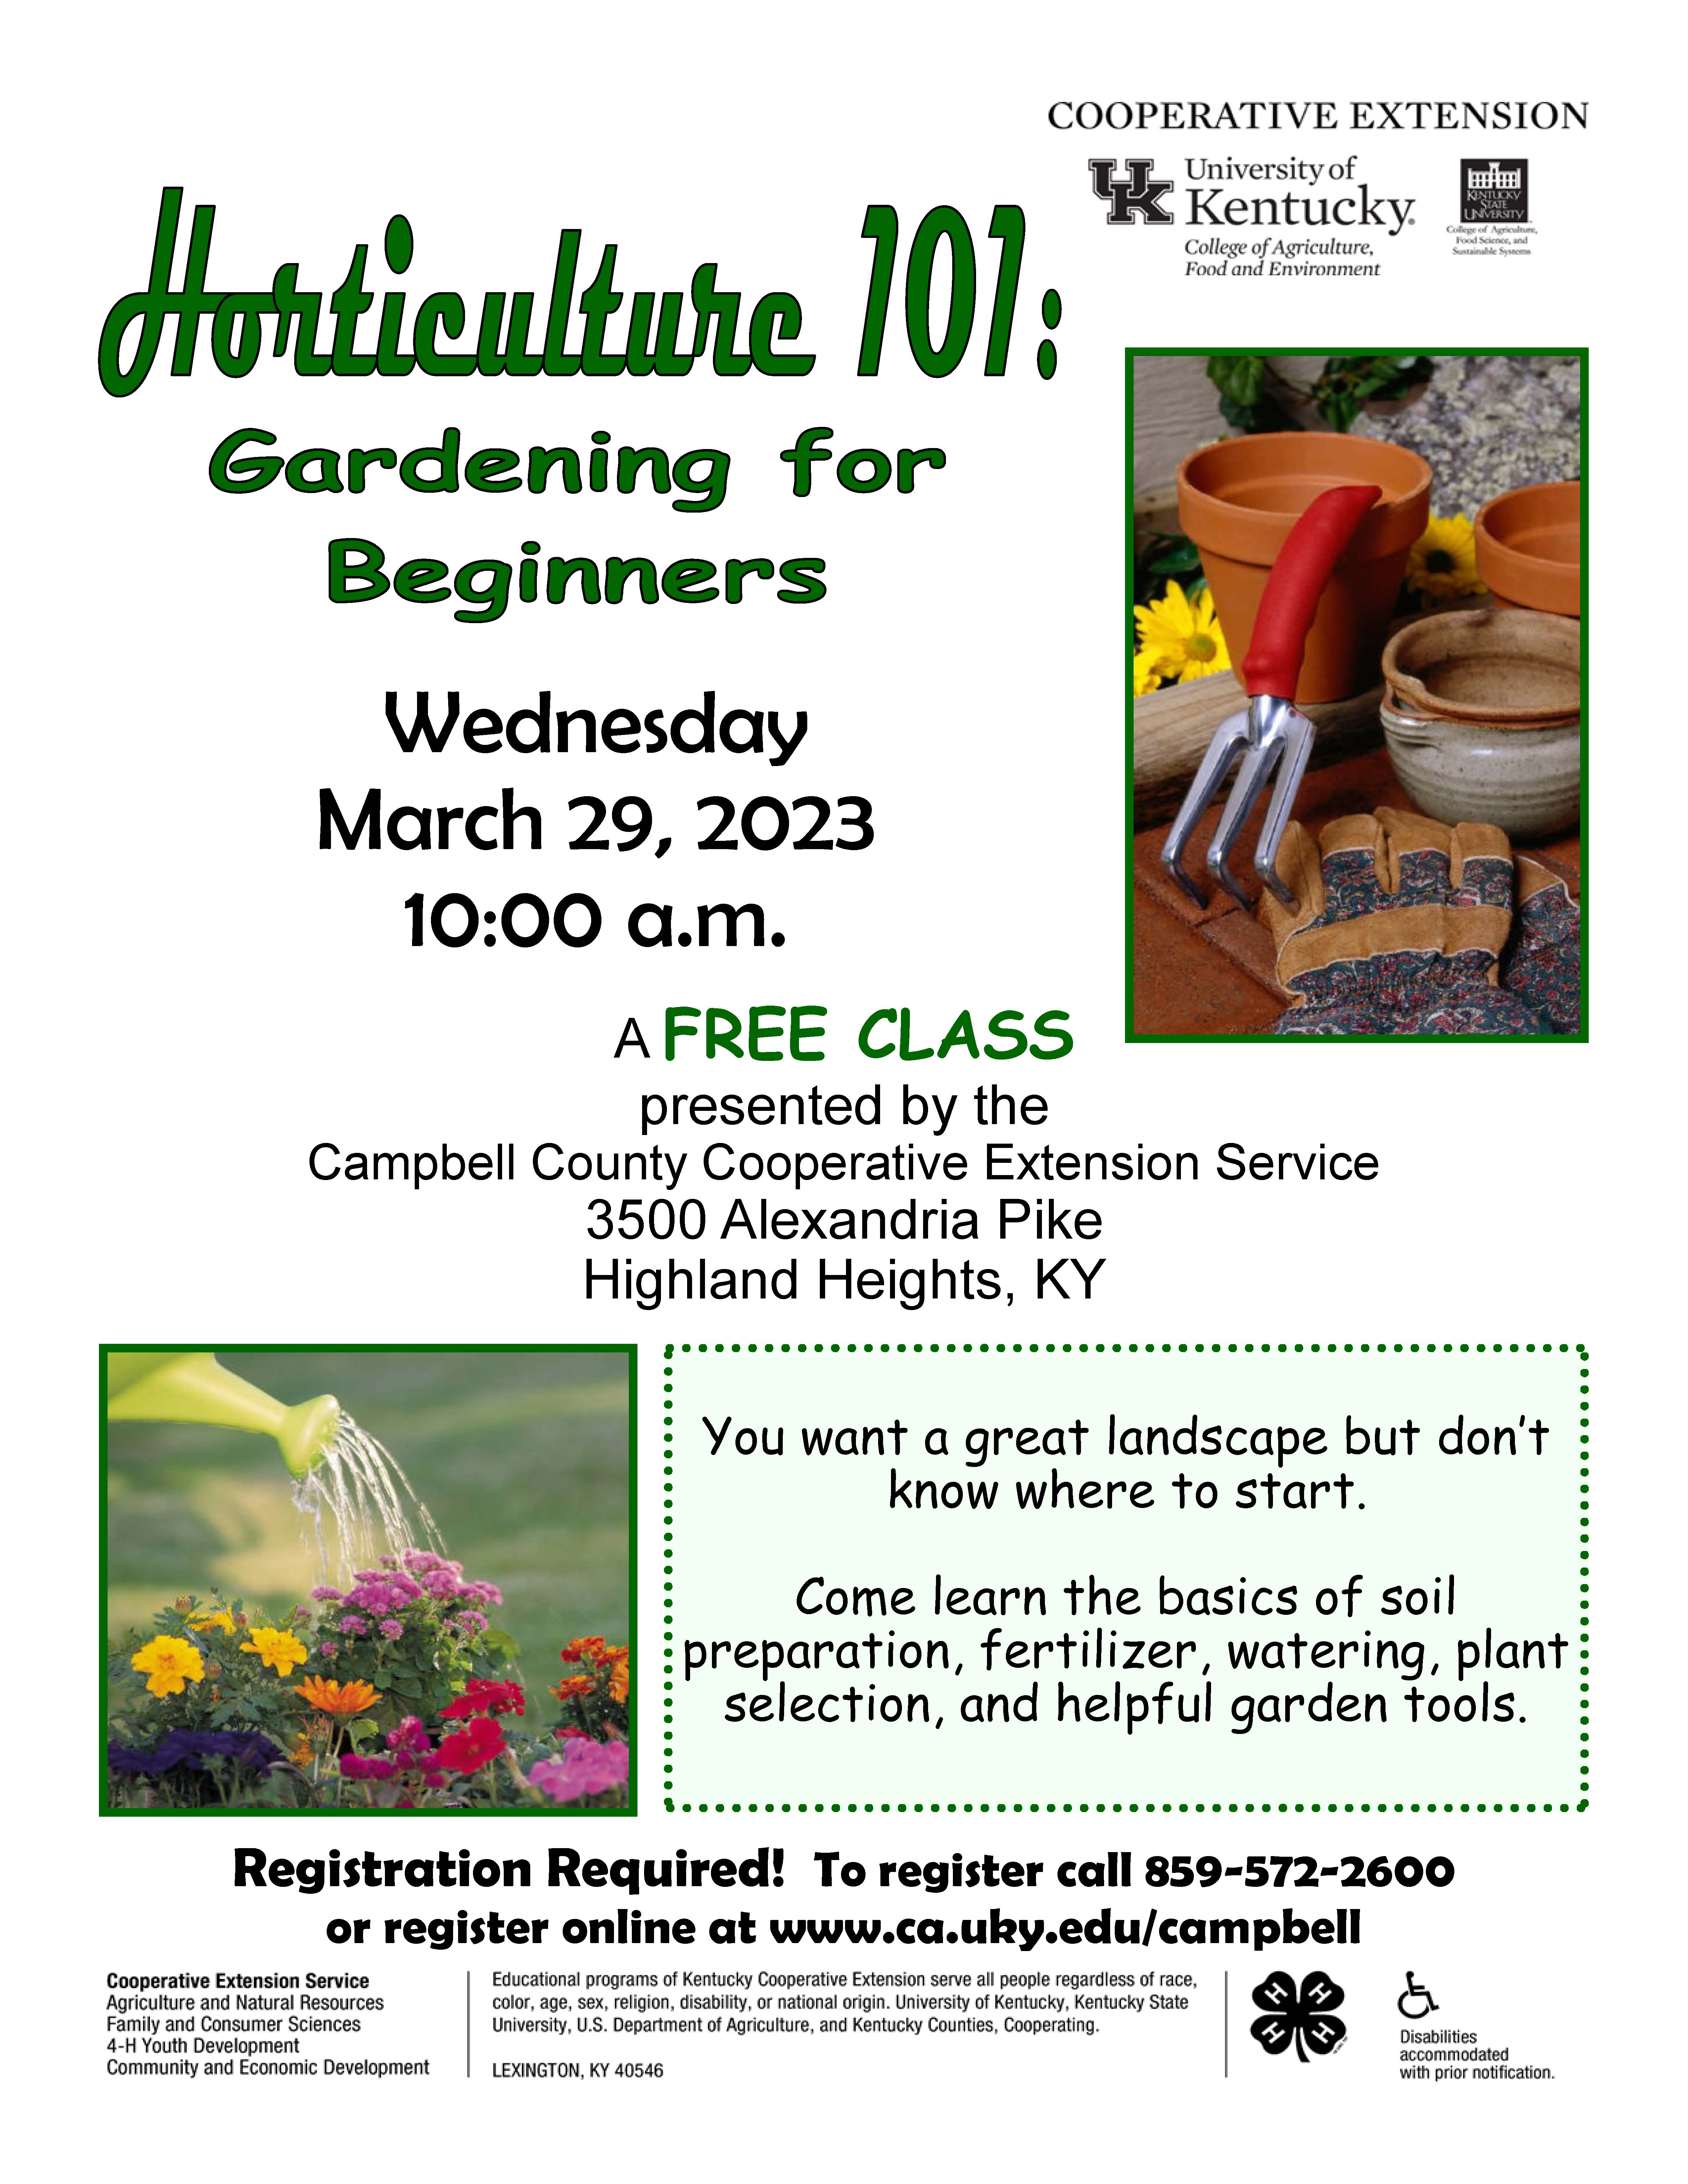 Horticulture 101: Gardening for Beginners, March 29 at 10:00am, at the Campbell County Cooperative Extension Office at 3500 Alexandria Pike Highland Heights, KY 41076. Call 859-572-2600 to register!